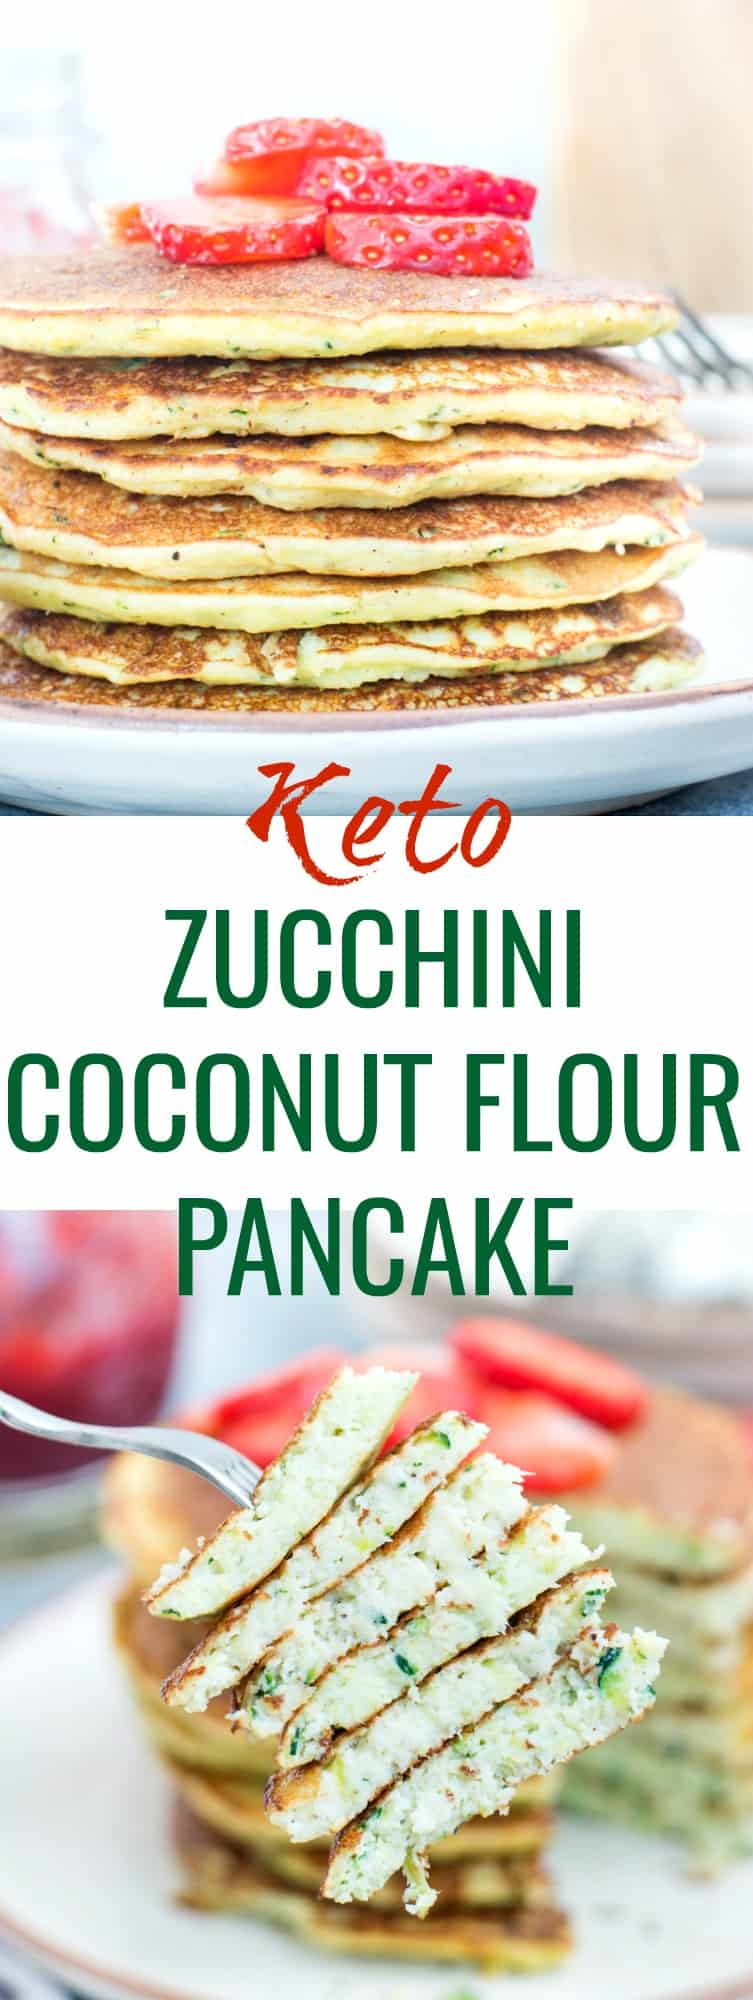 These  Low Carb Coconut Flour Pancakes with zucchini, cream cheese are fluffy, delicious and Keto friendly. Top these pancakes with fresh berries or Honey(Non-Keto) for a delicious breakfast.